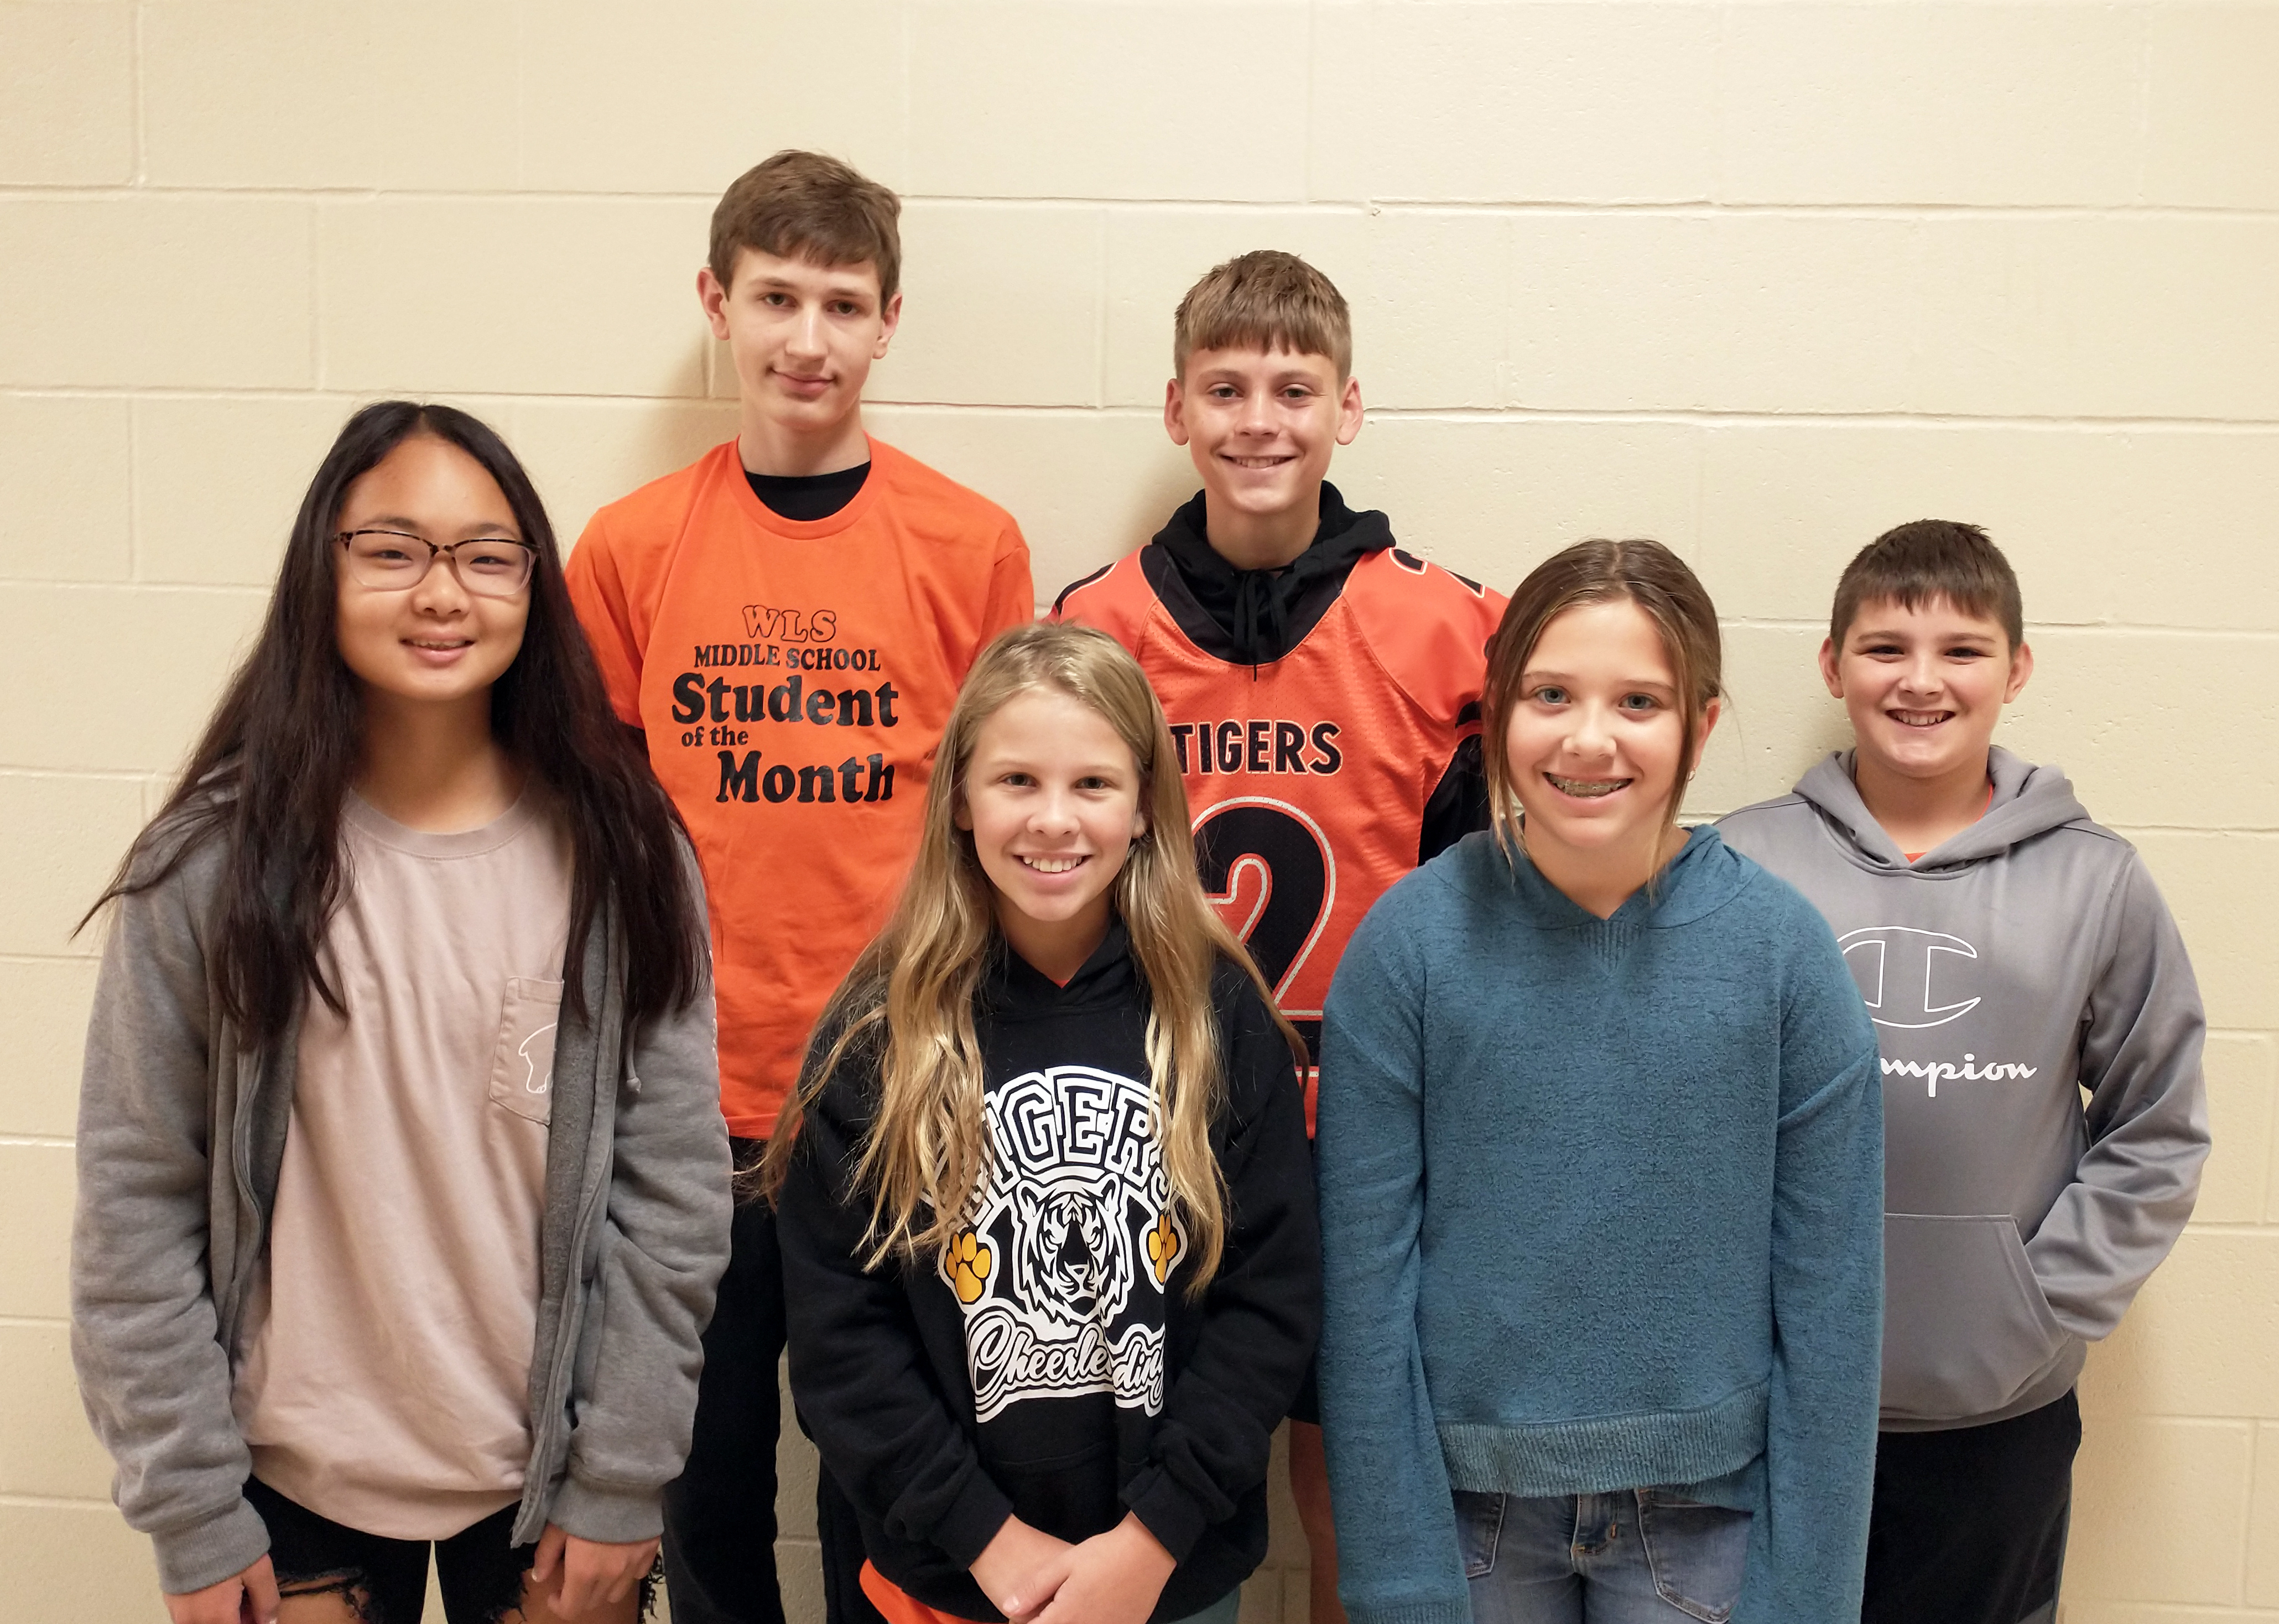 SEPTEMBER MS STUDENTS OF THE MONTH